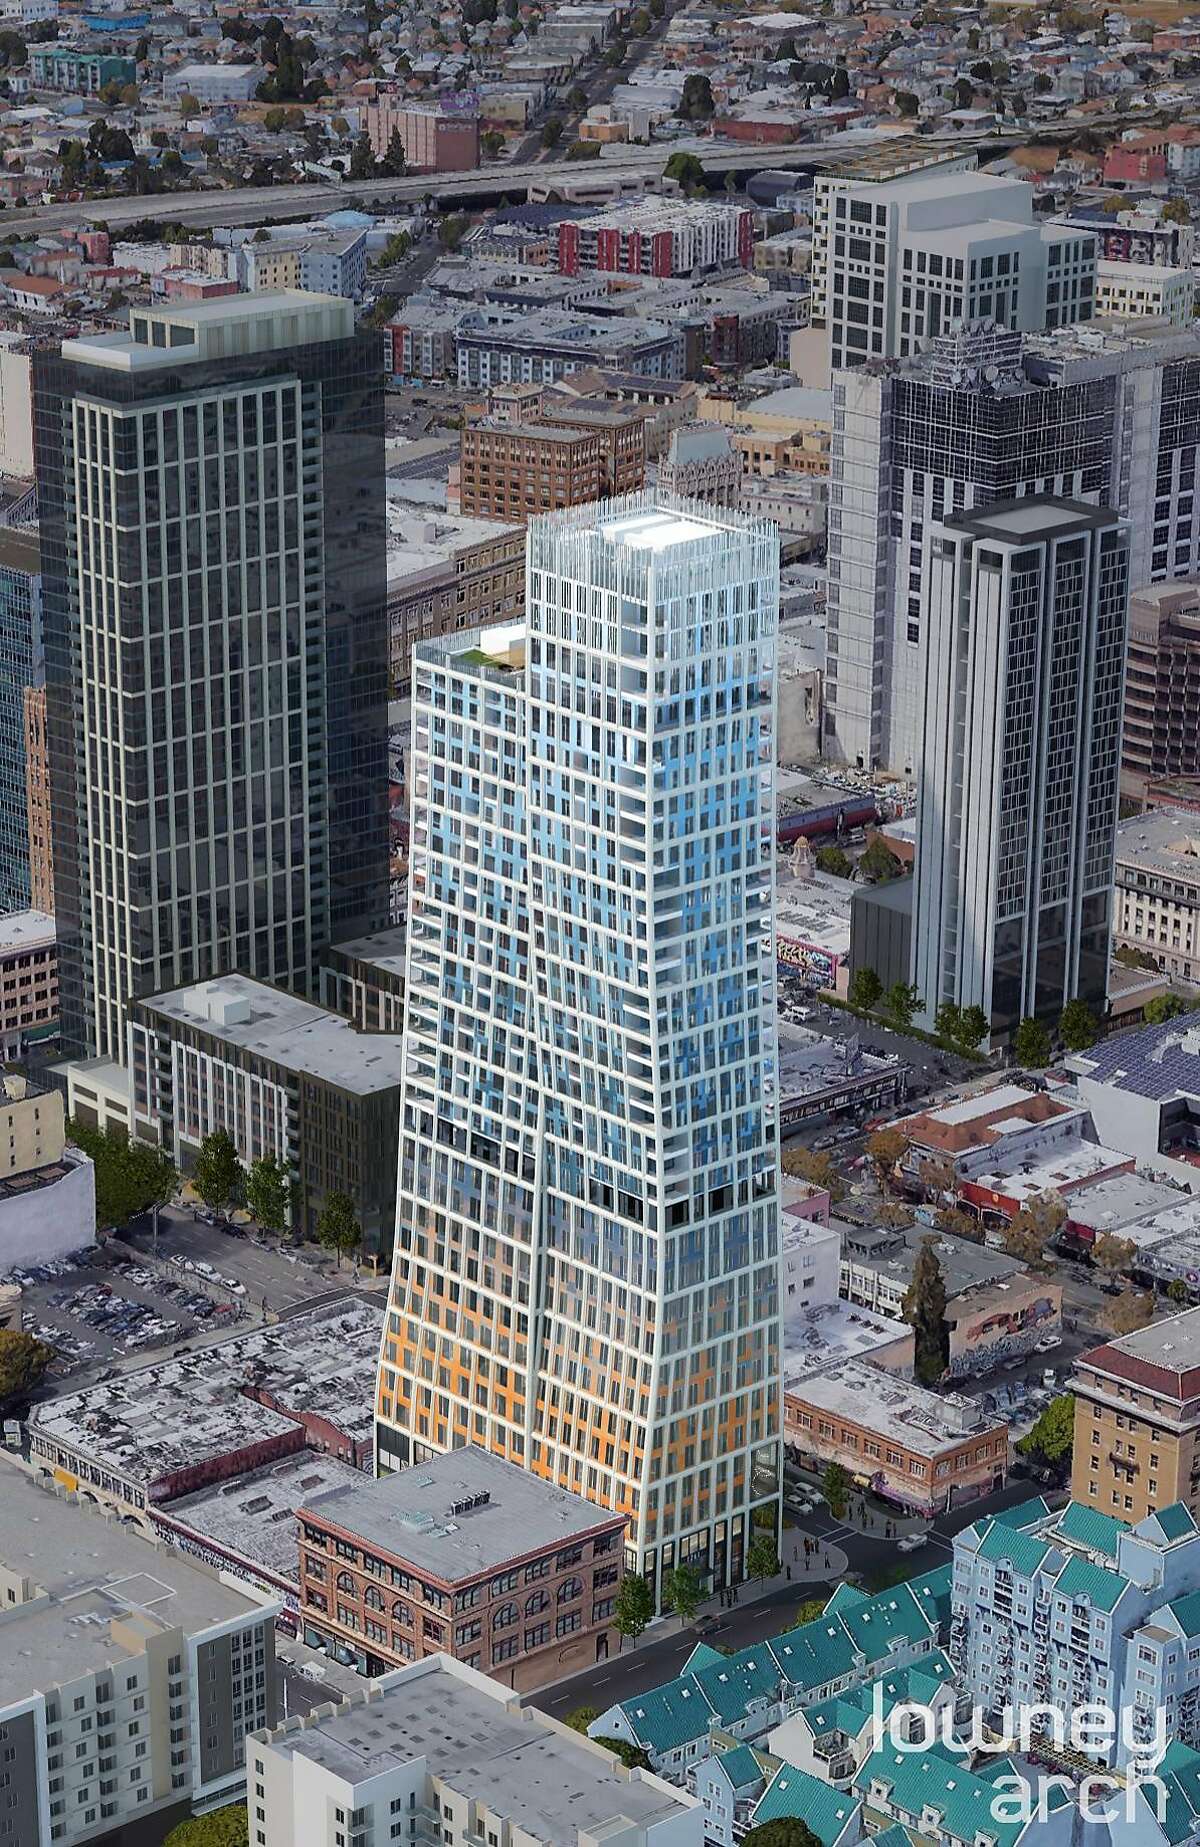 A rendering of 1261 Harrison St., a proposed 36-story, 460-foot tower for downtown Oakland. If approved and built, the high-rise would be the city's tallest building.